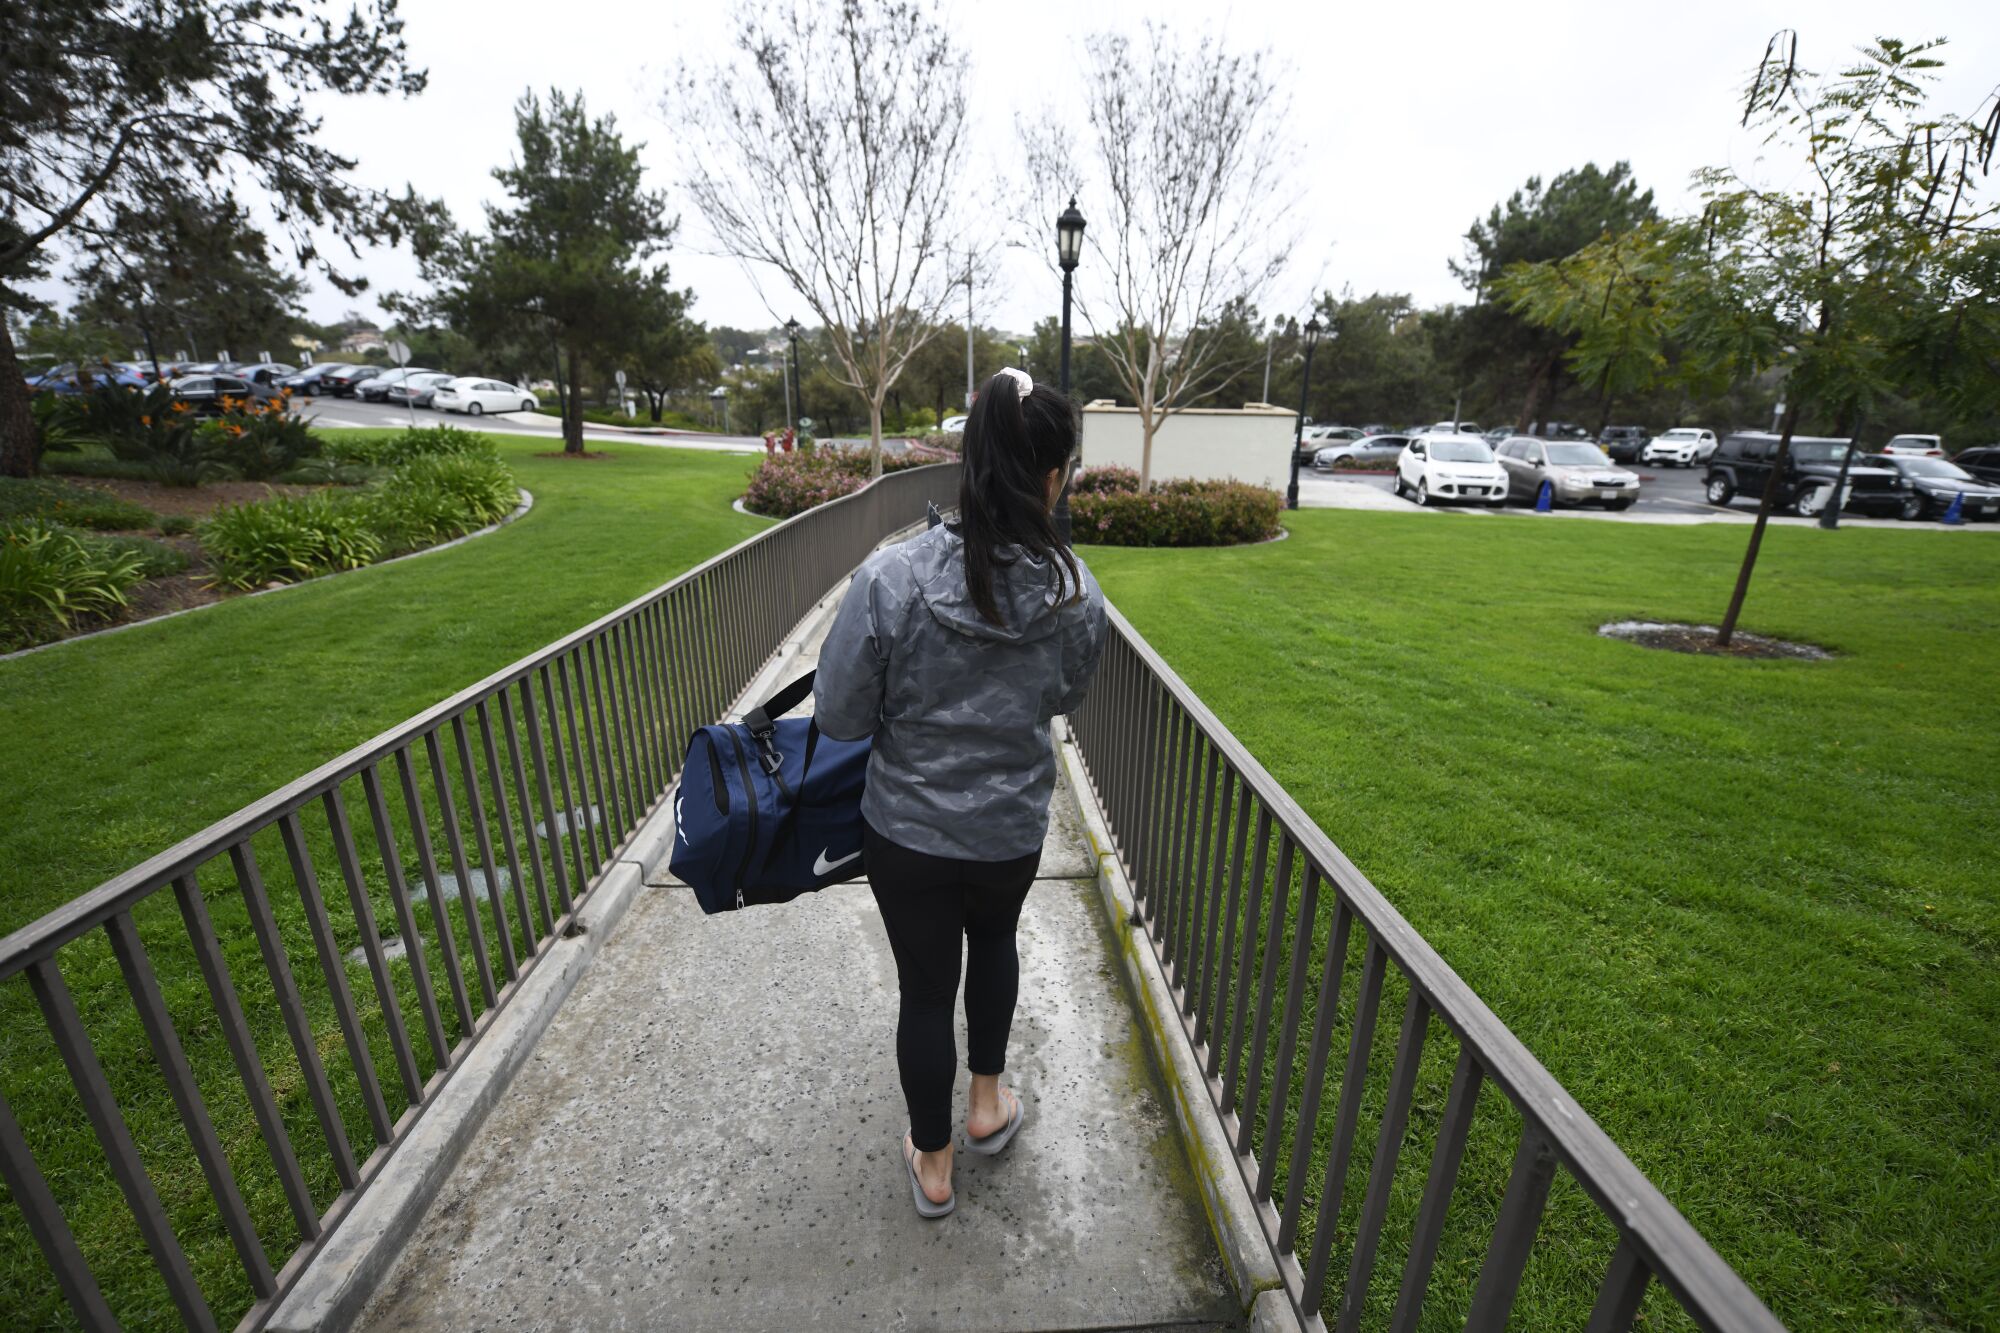 In March, all 2,600 dormitory students at University of San Diego were told to move out due to the coronavirus